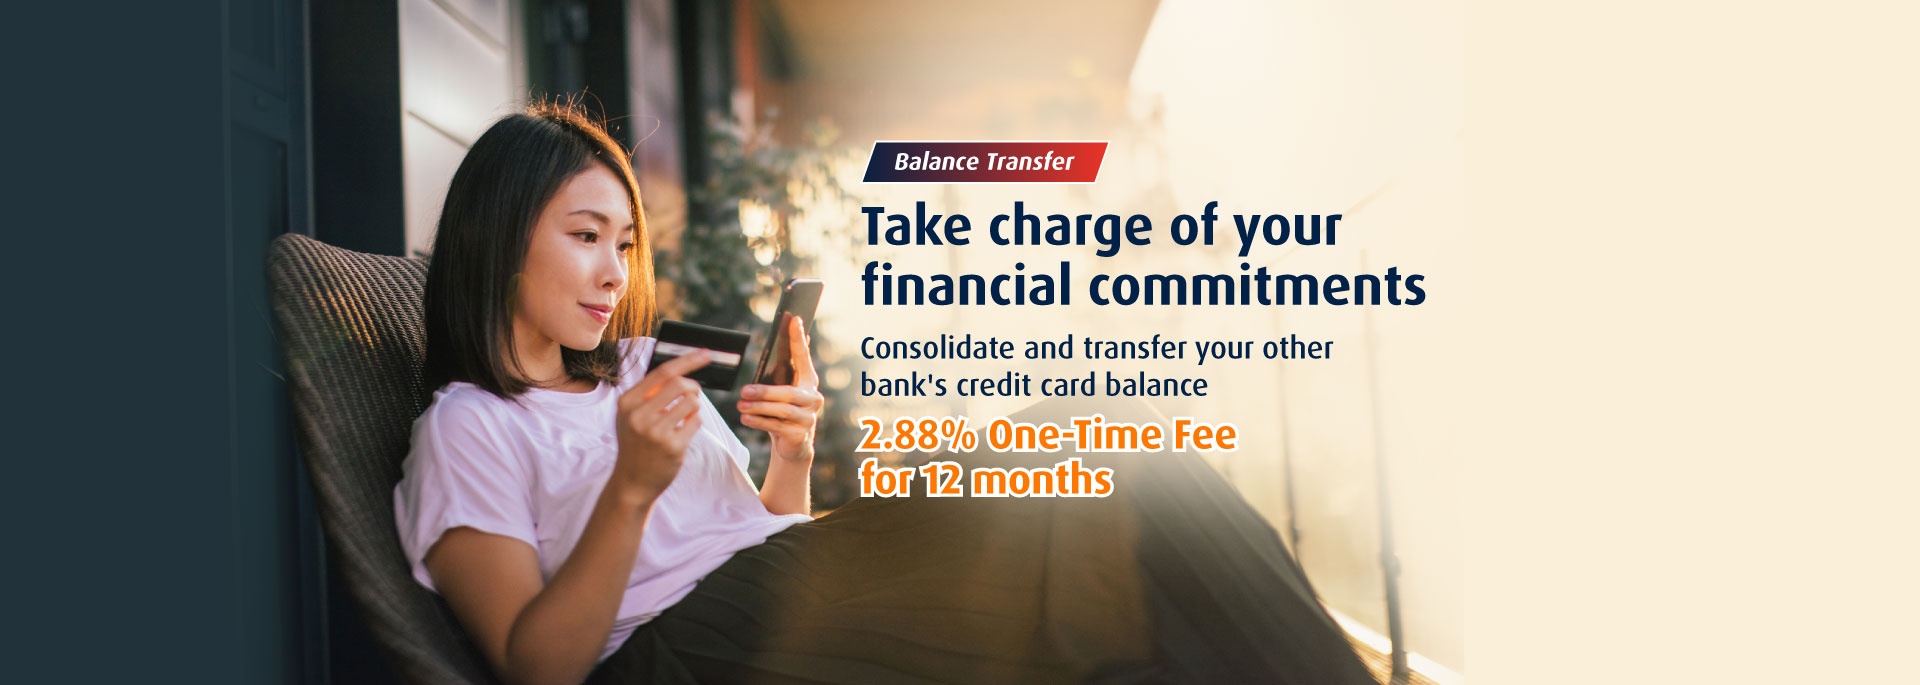 By Invitation Only: Exclusive 0% Interest Balance Transfer For You